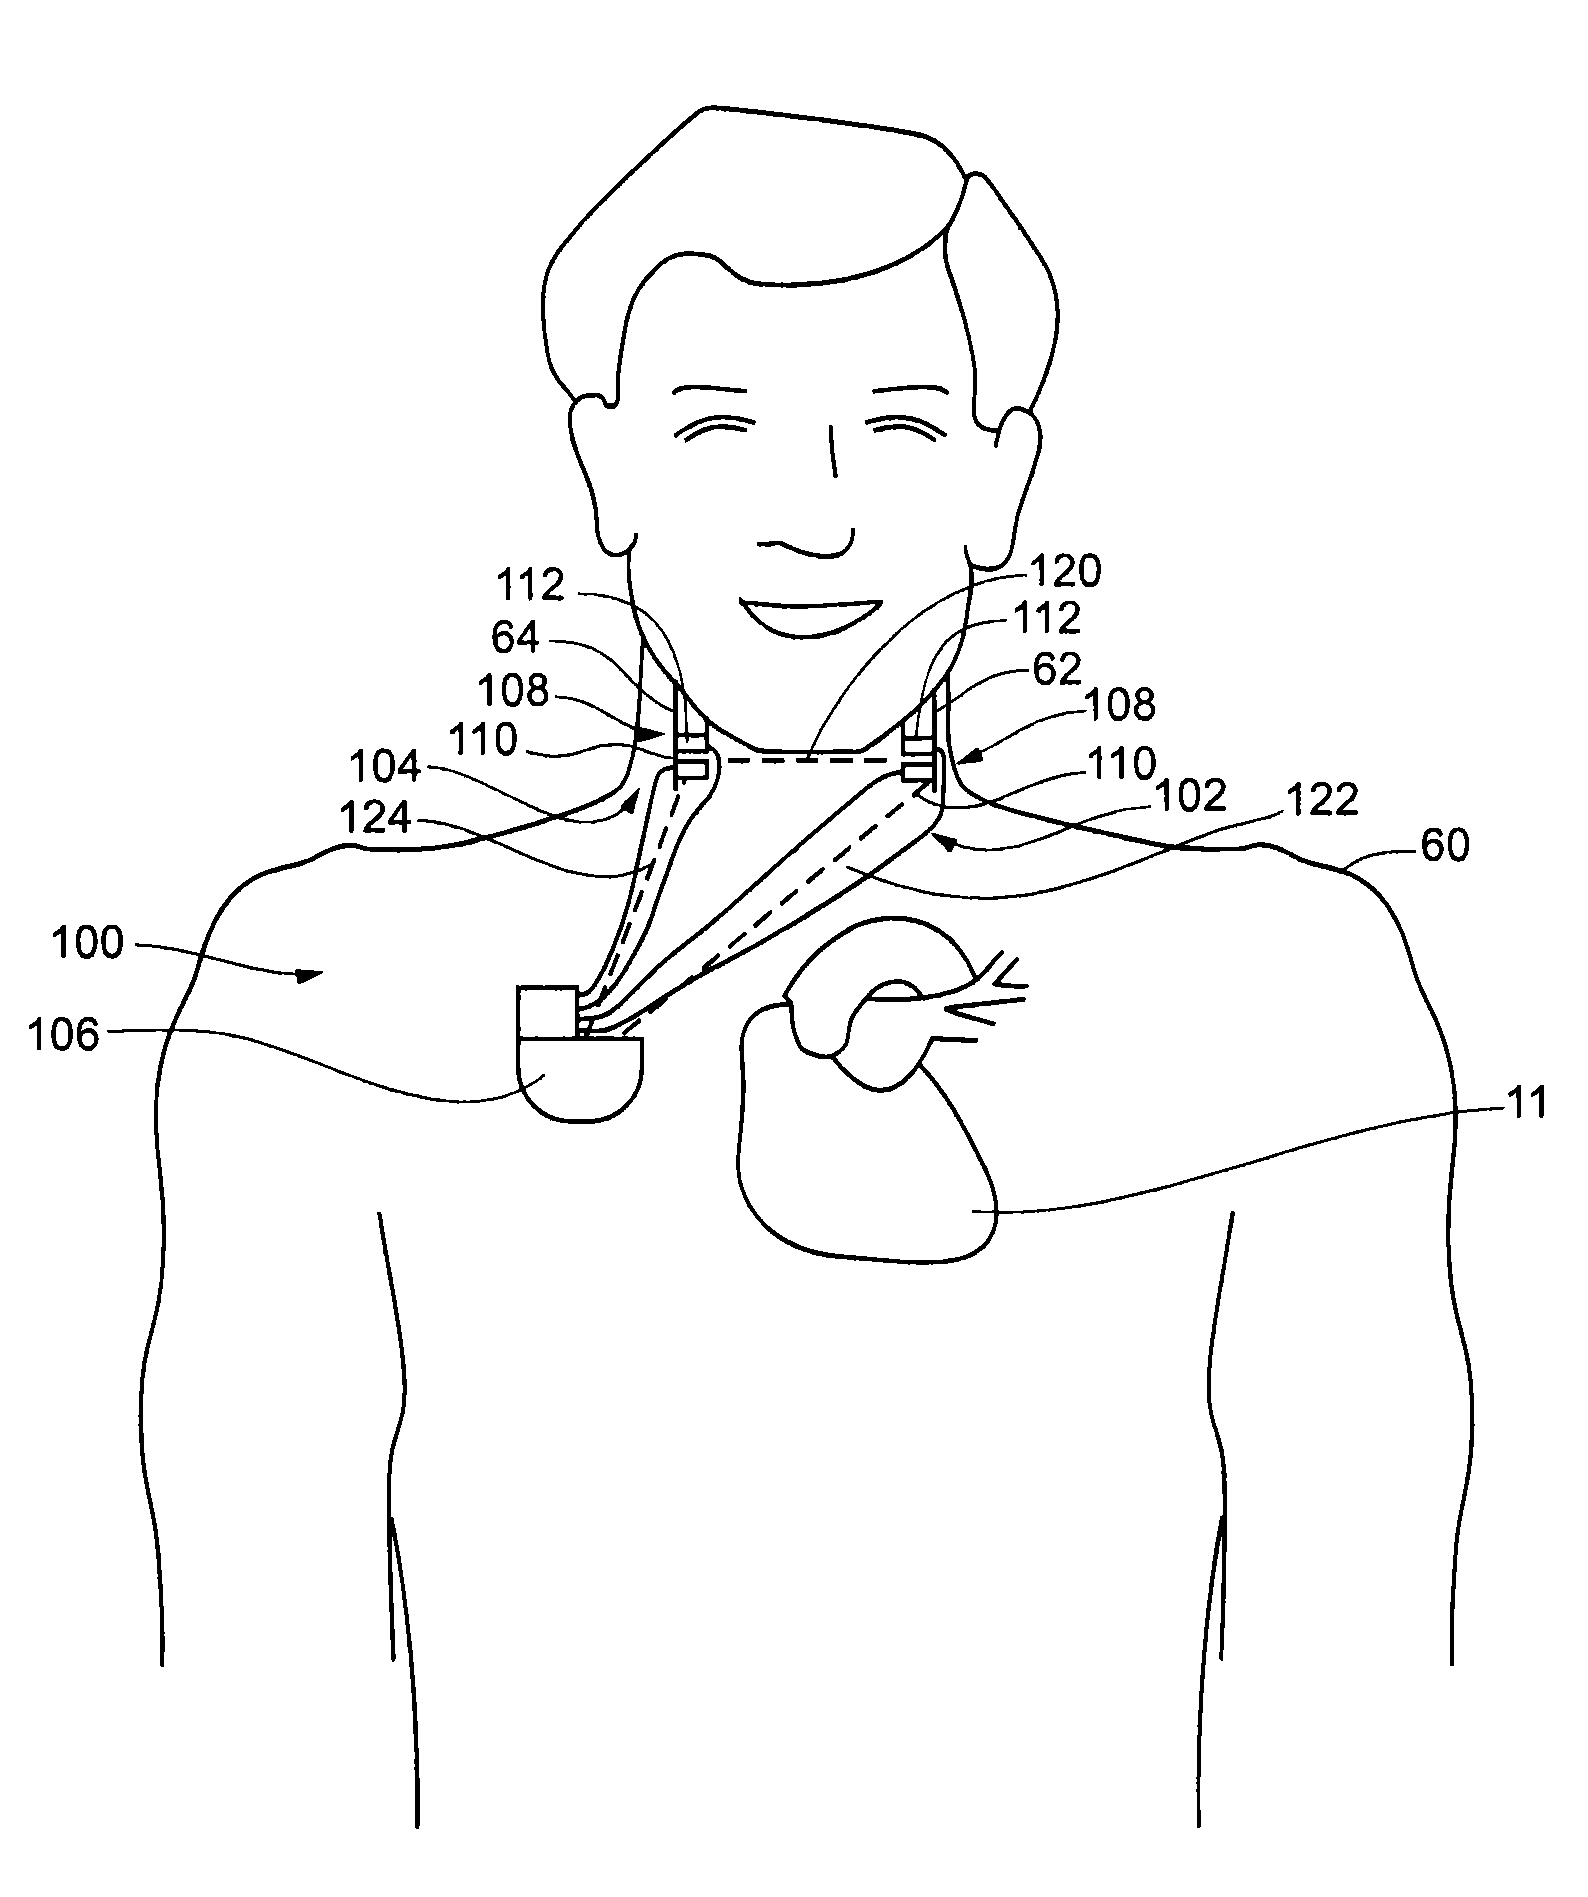 Method for monitoring physiological cycles of a patient to optimize patient therapy